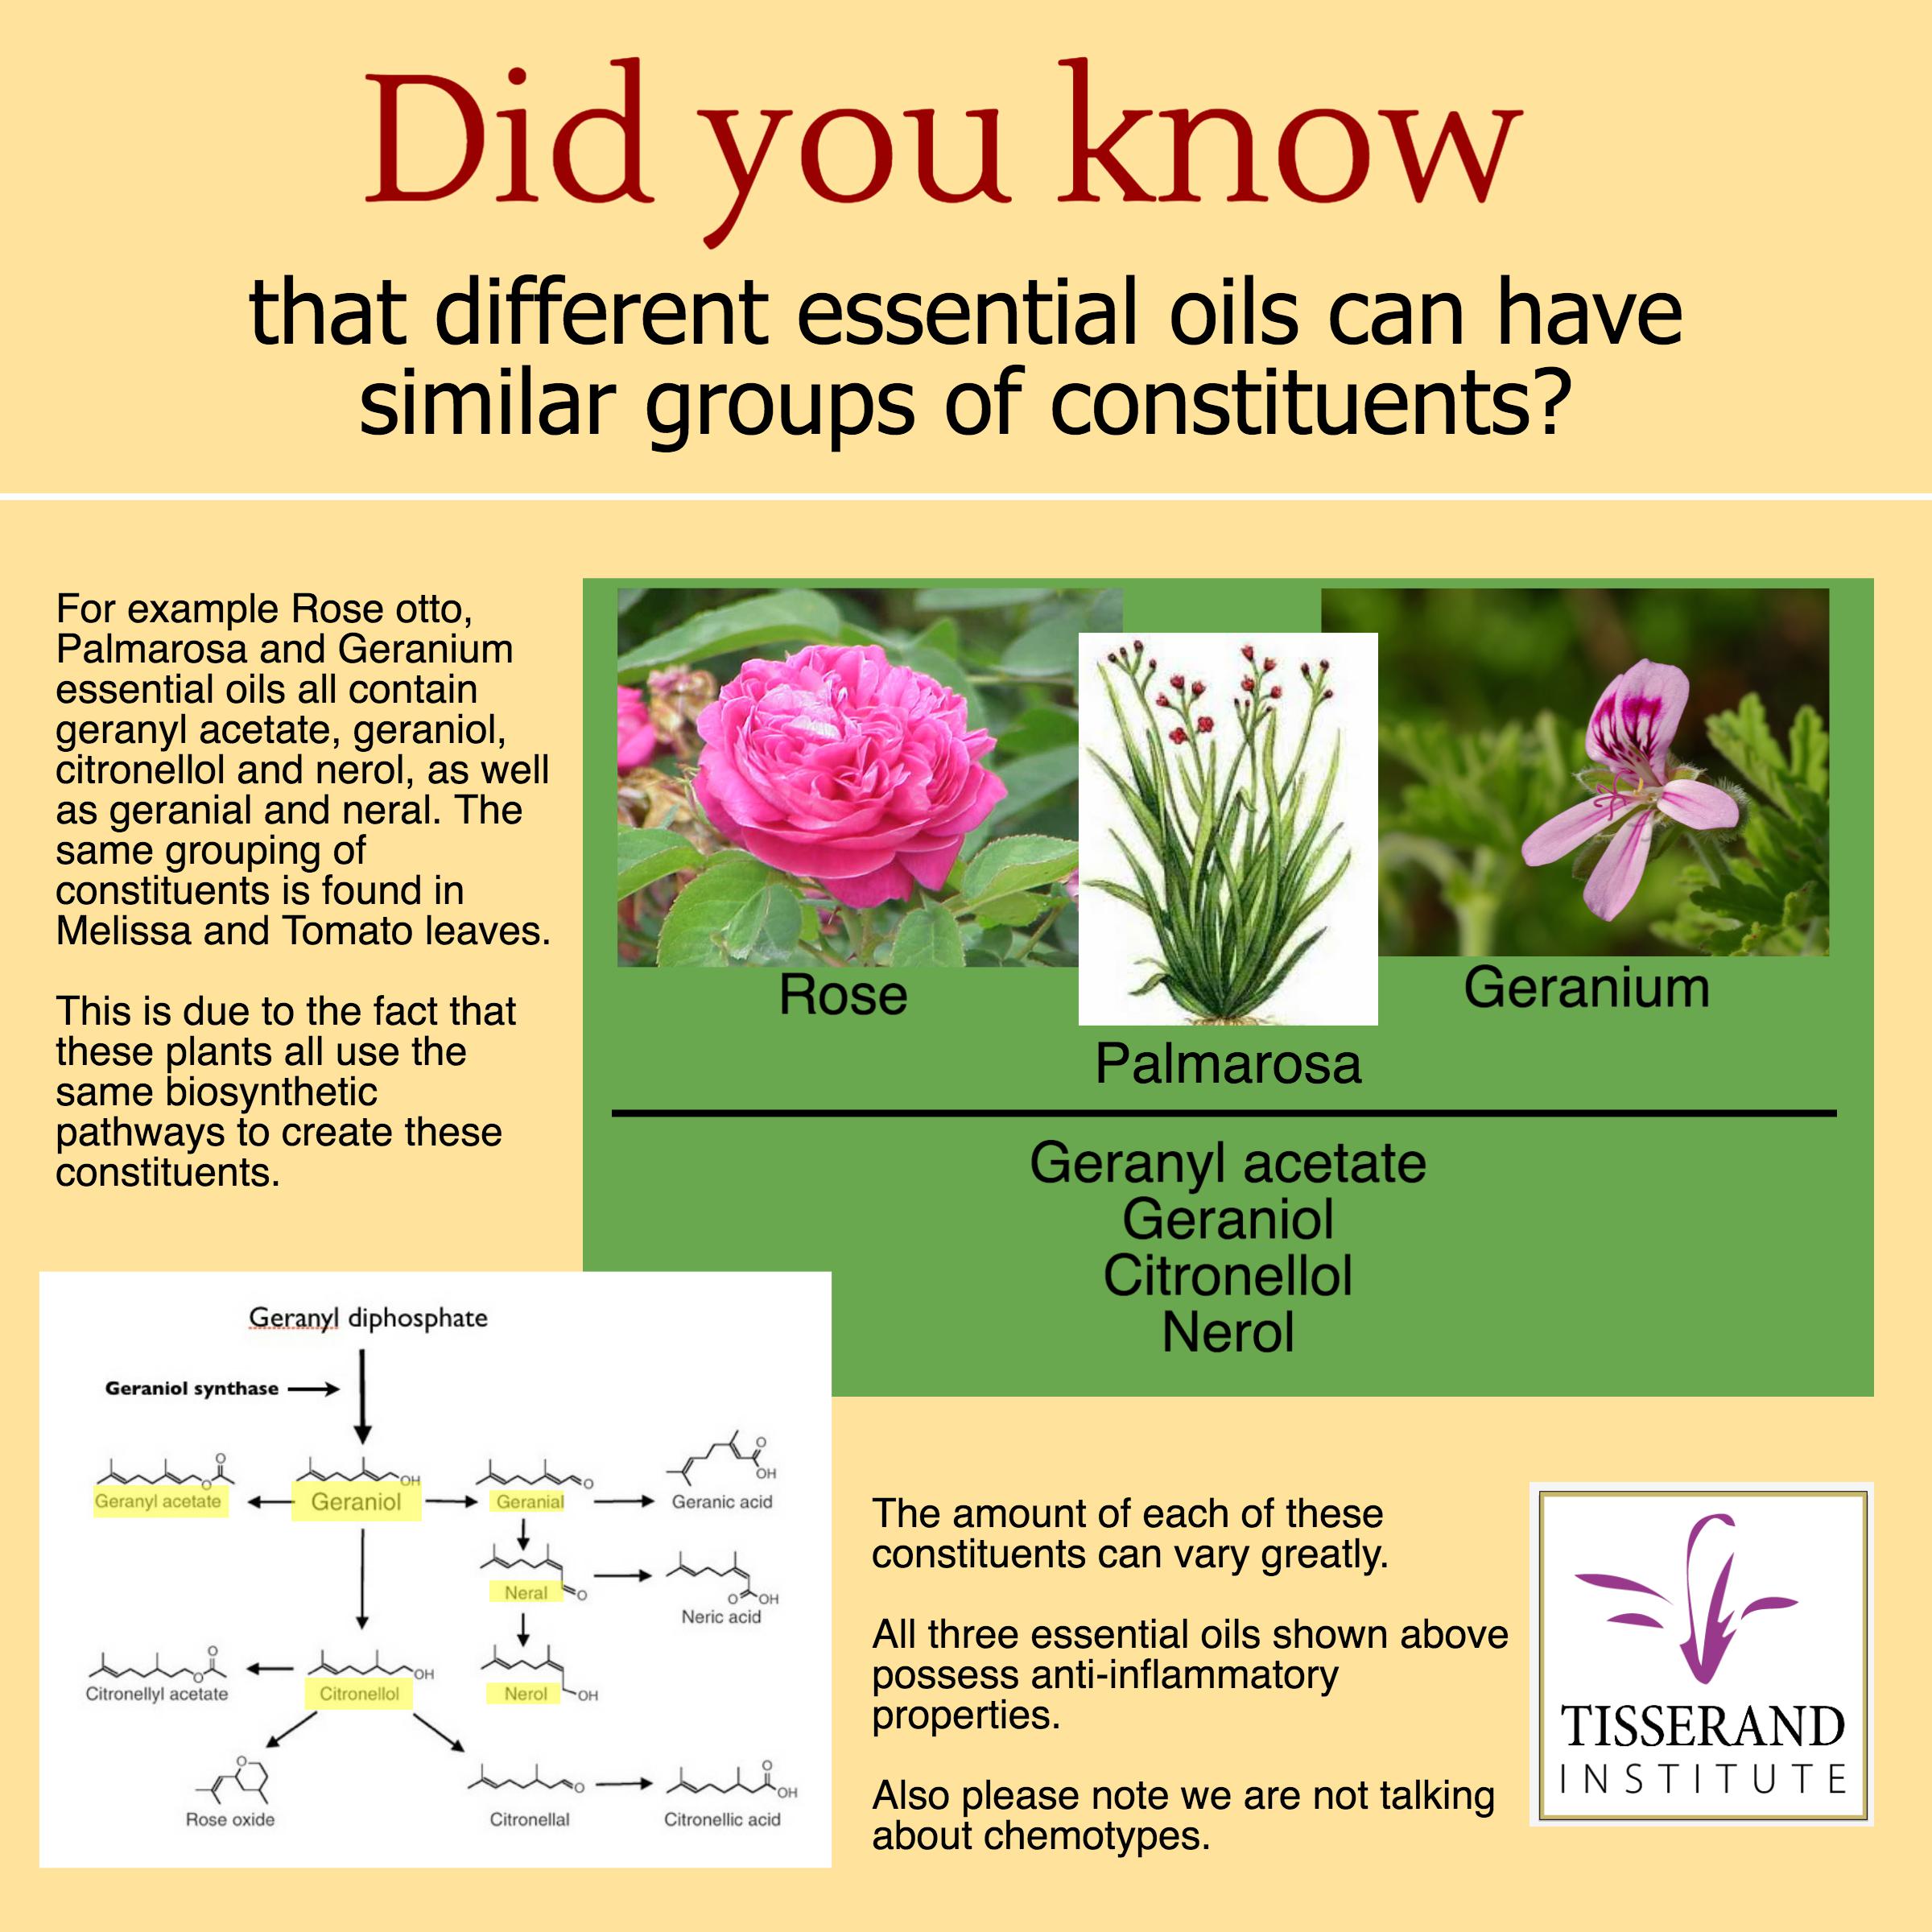 Essential Oils | Did You Know That Different Essential Oils Can Have Similar Groups of Constituents?